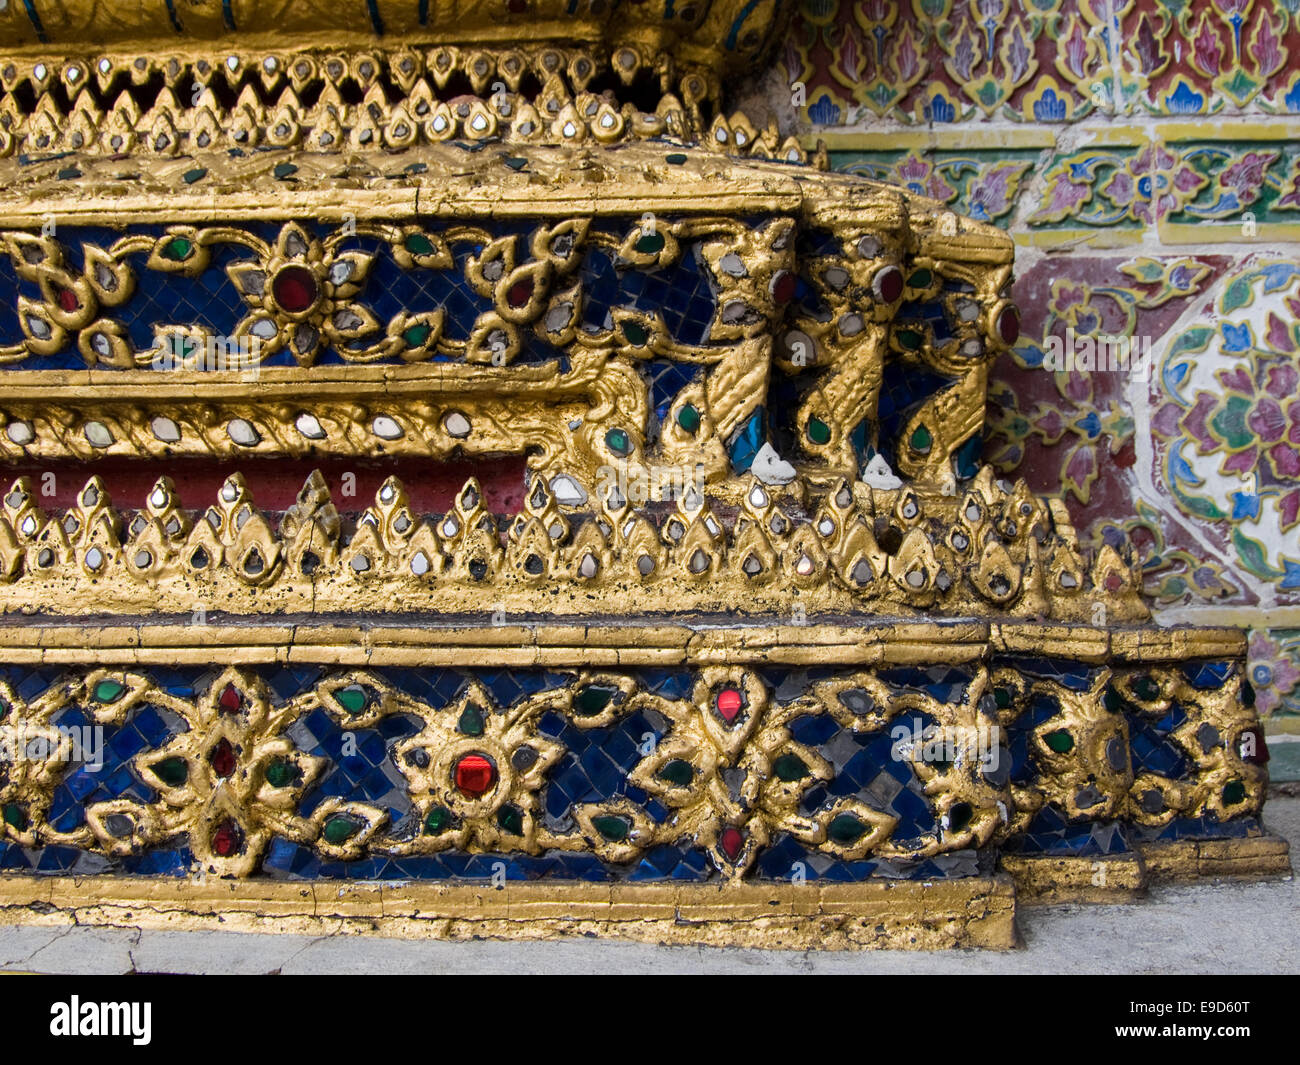 details of the King palace of Thailand Stock Photo